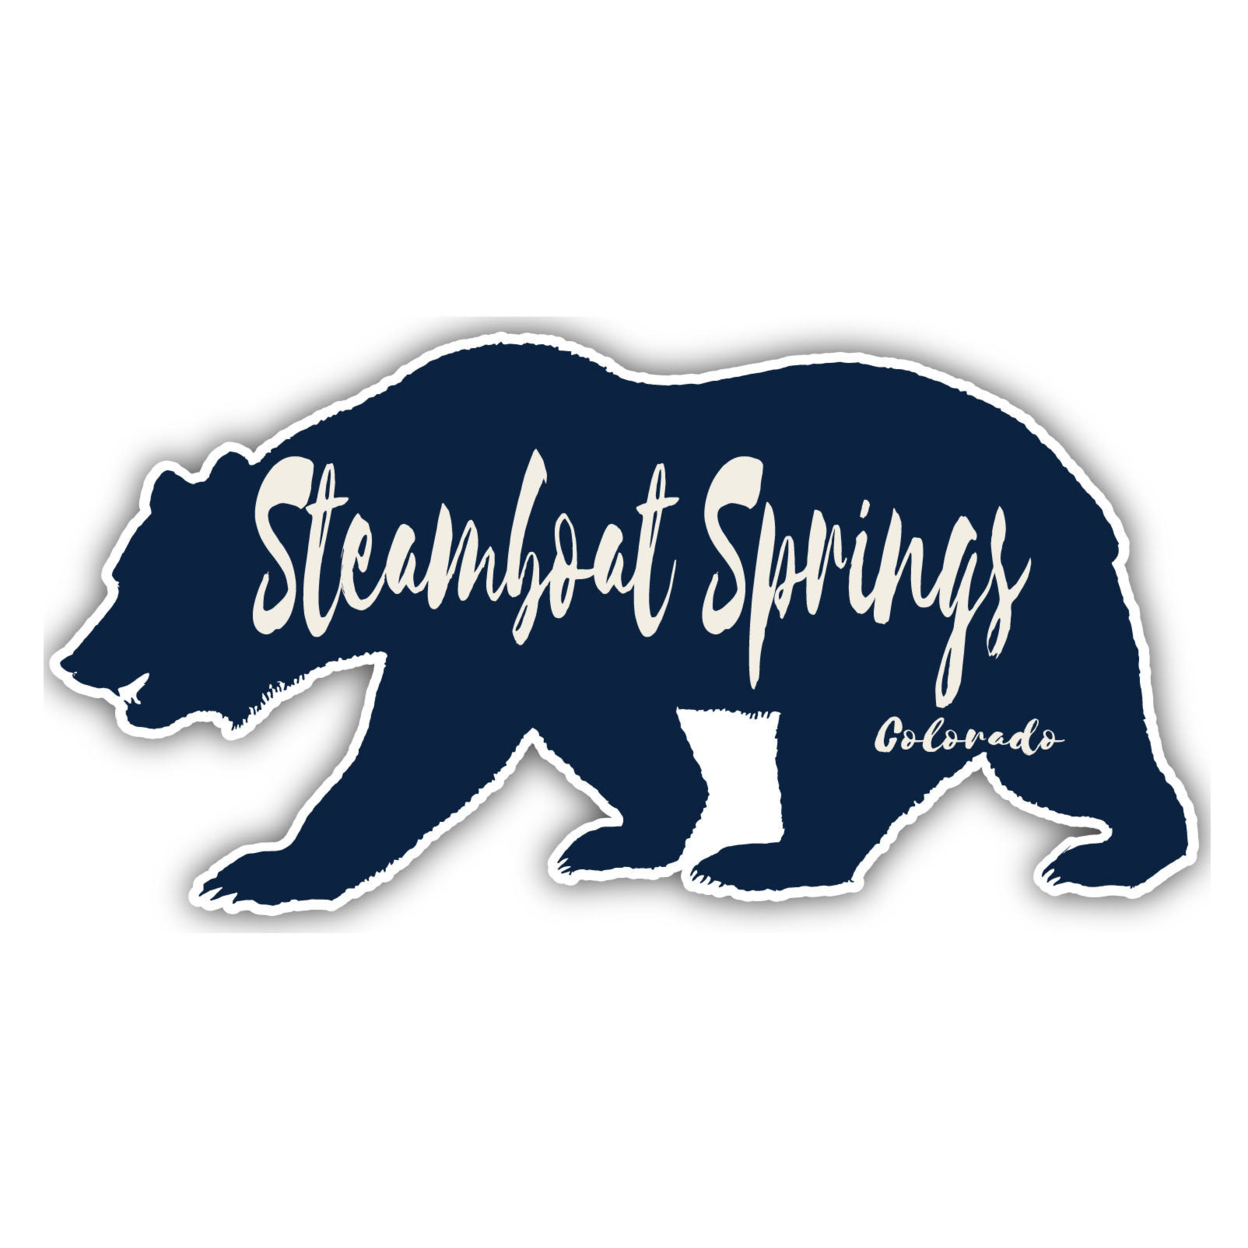 Steamboat Springs Colorado Souvenir Decorative Stickers (Choose Theme And Size) - Single Unit, 2-Inch, Bear